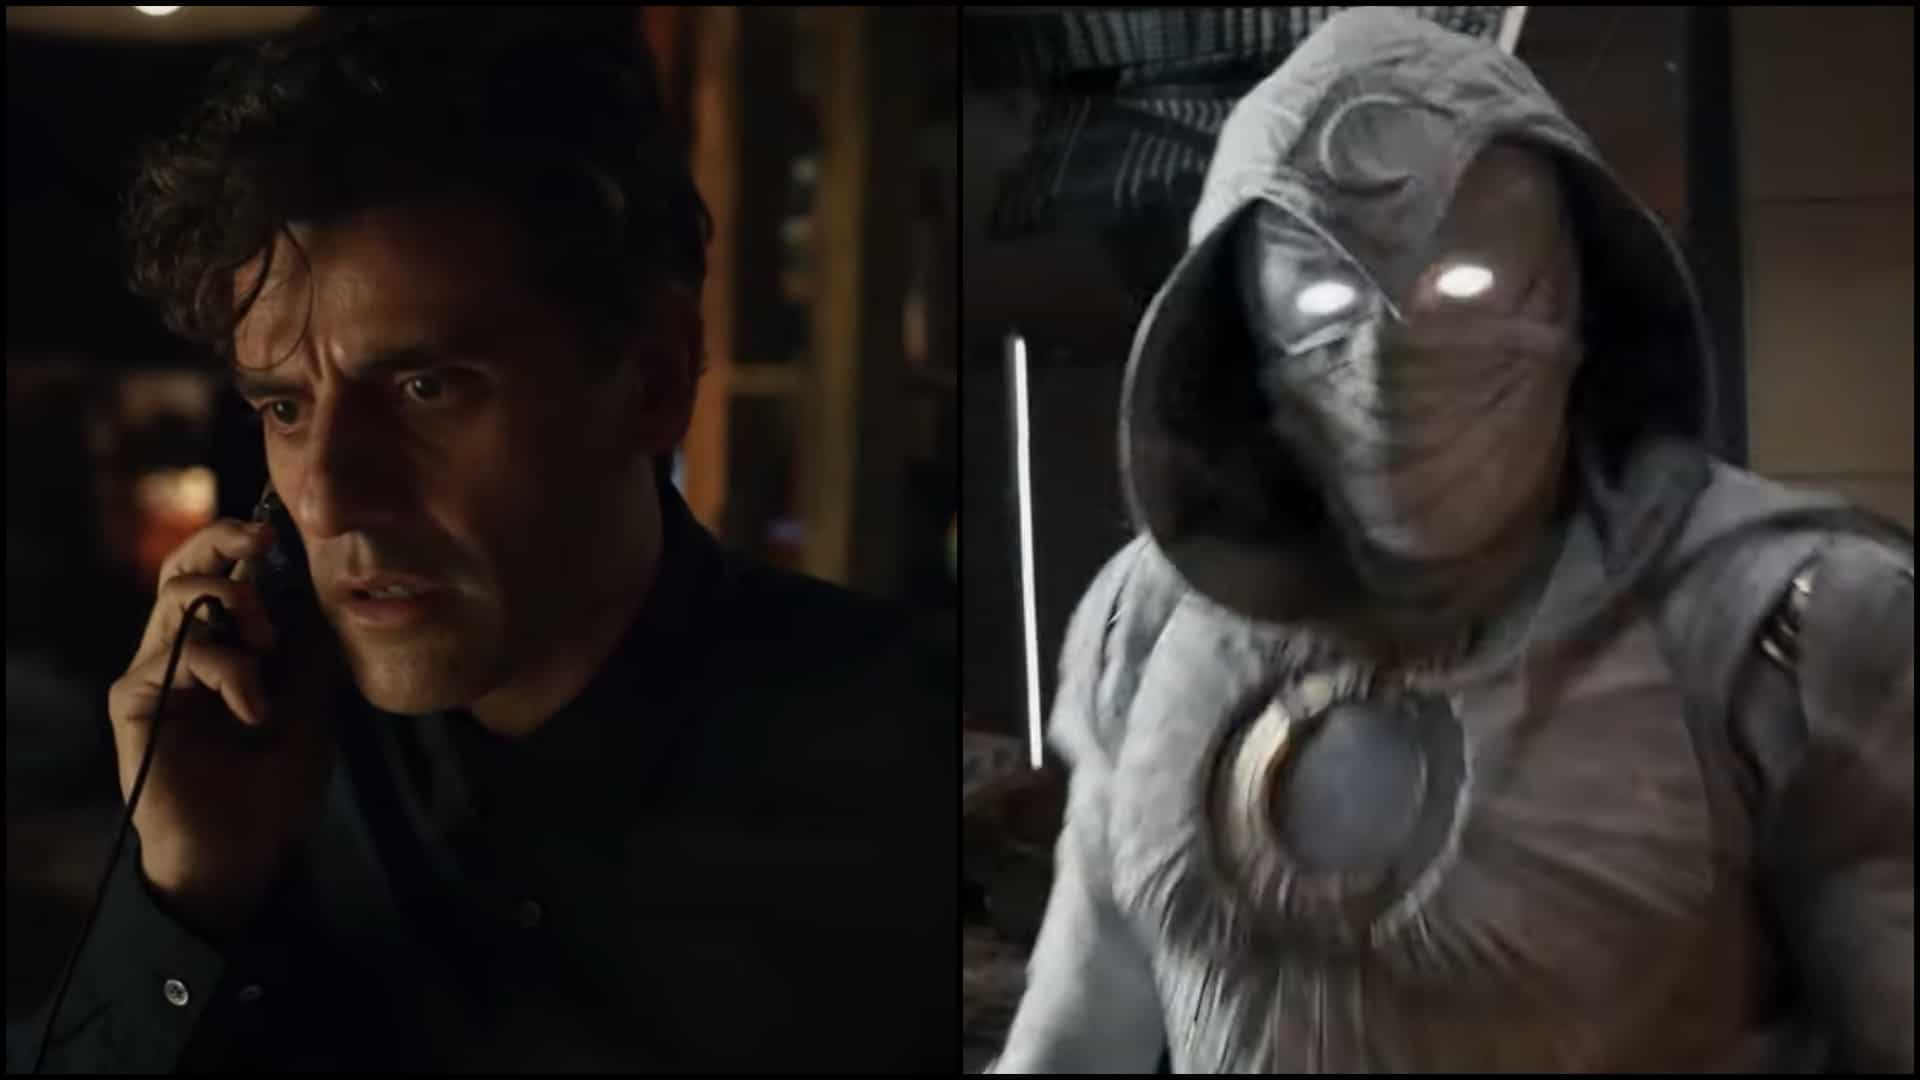 Moon Knight Trailer: MCU Goes DARK With Its New Series, Fans Are Mighty  Impressed With Oscar Isaac Embracing Chaos!